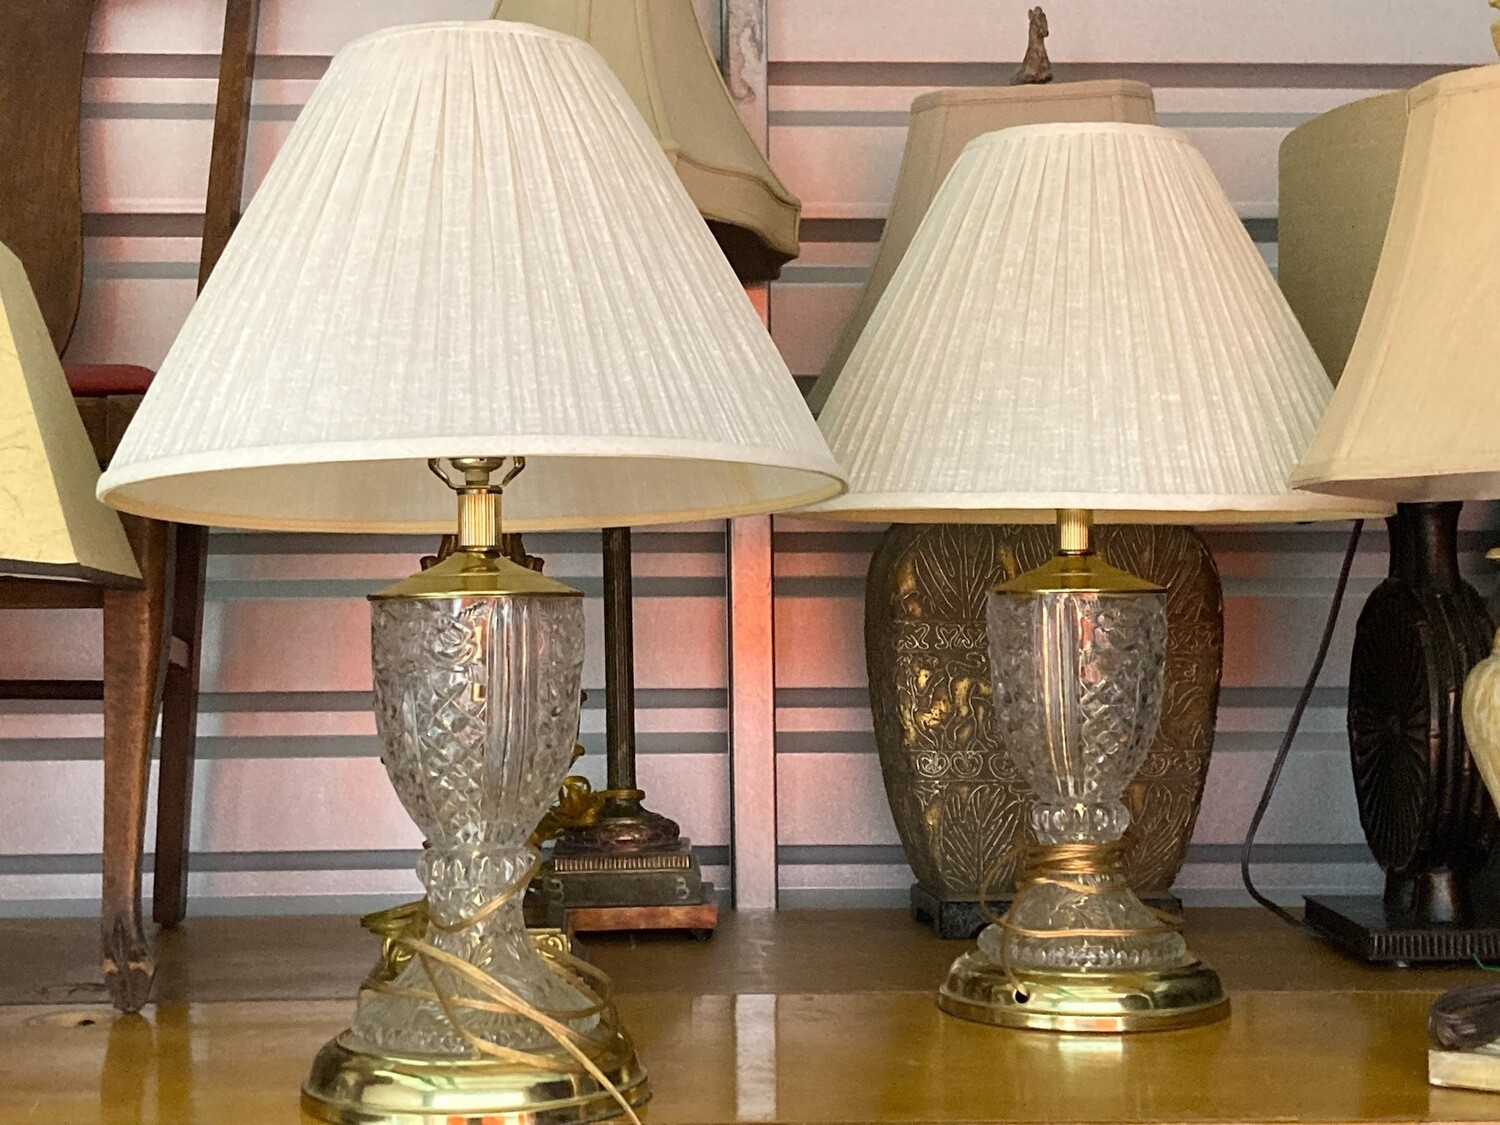 2 Crystal Lamps with gold bases #2213